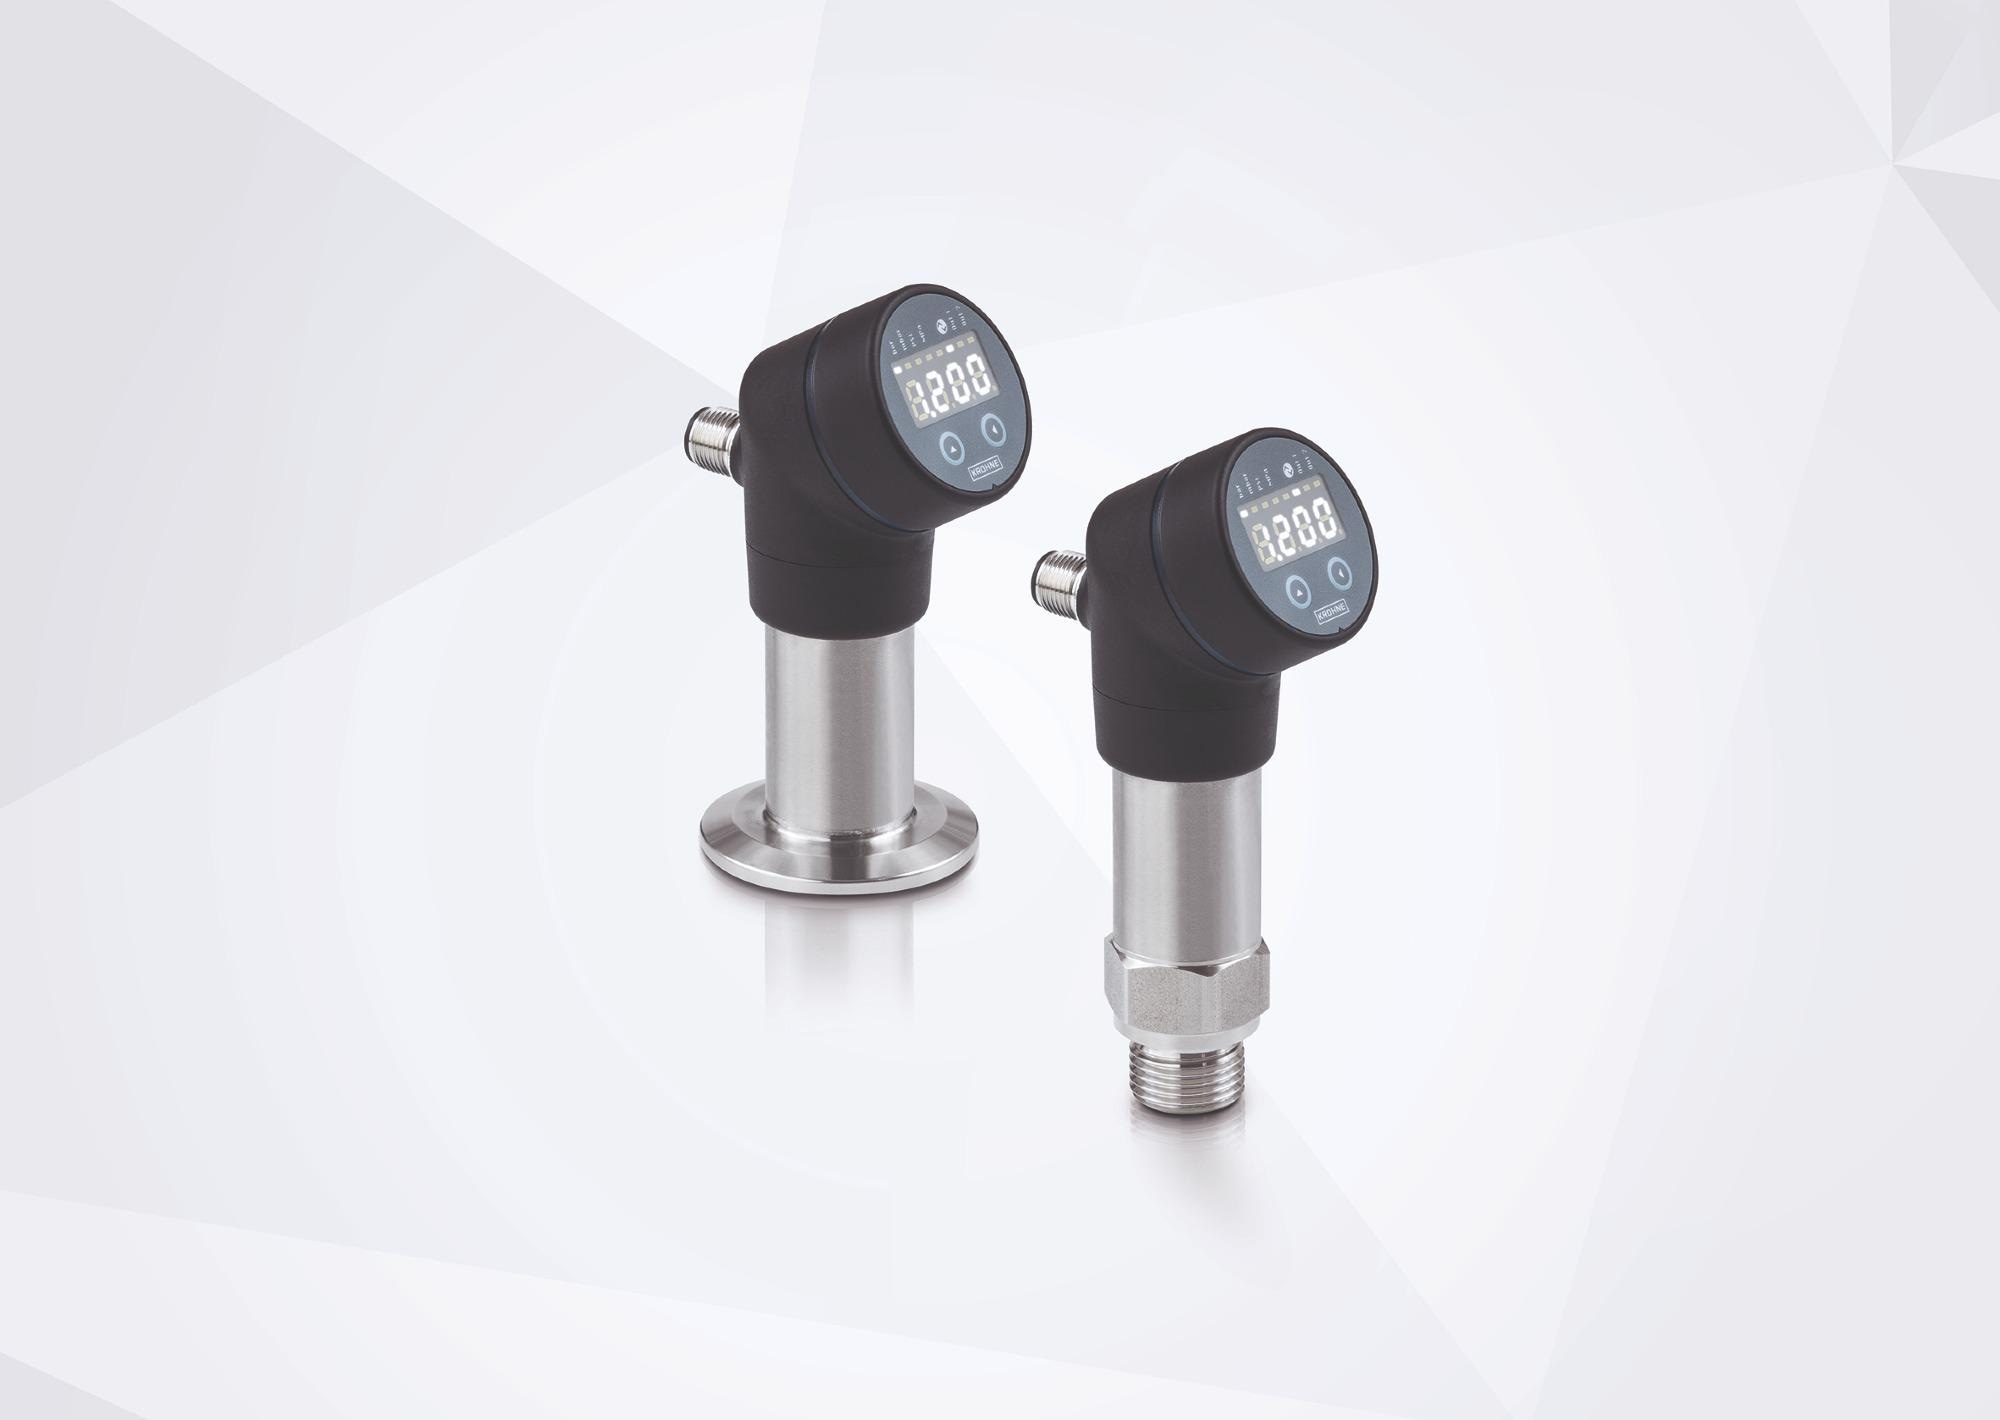 New Ultra-Compact Pressure Switches with IO-Link